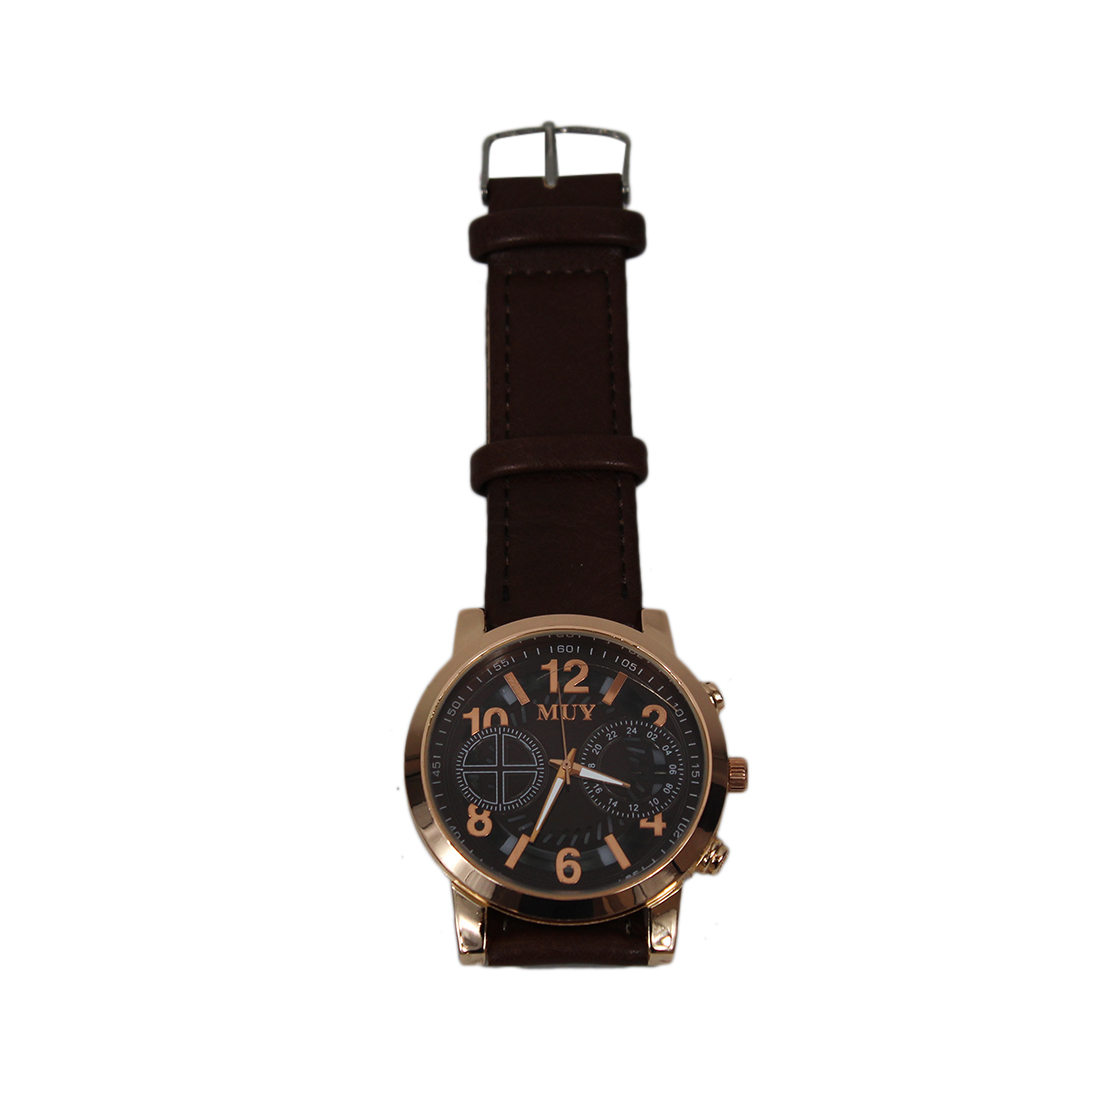 Stylish plain classic watch with gold